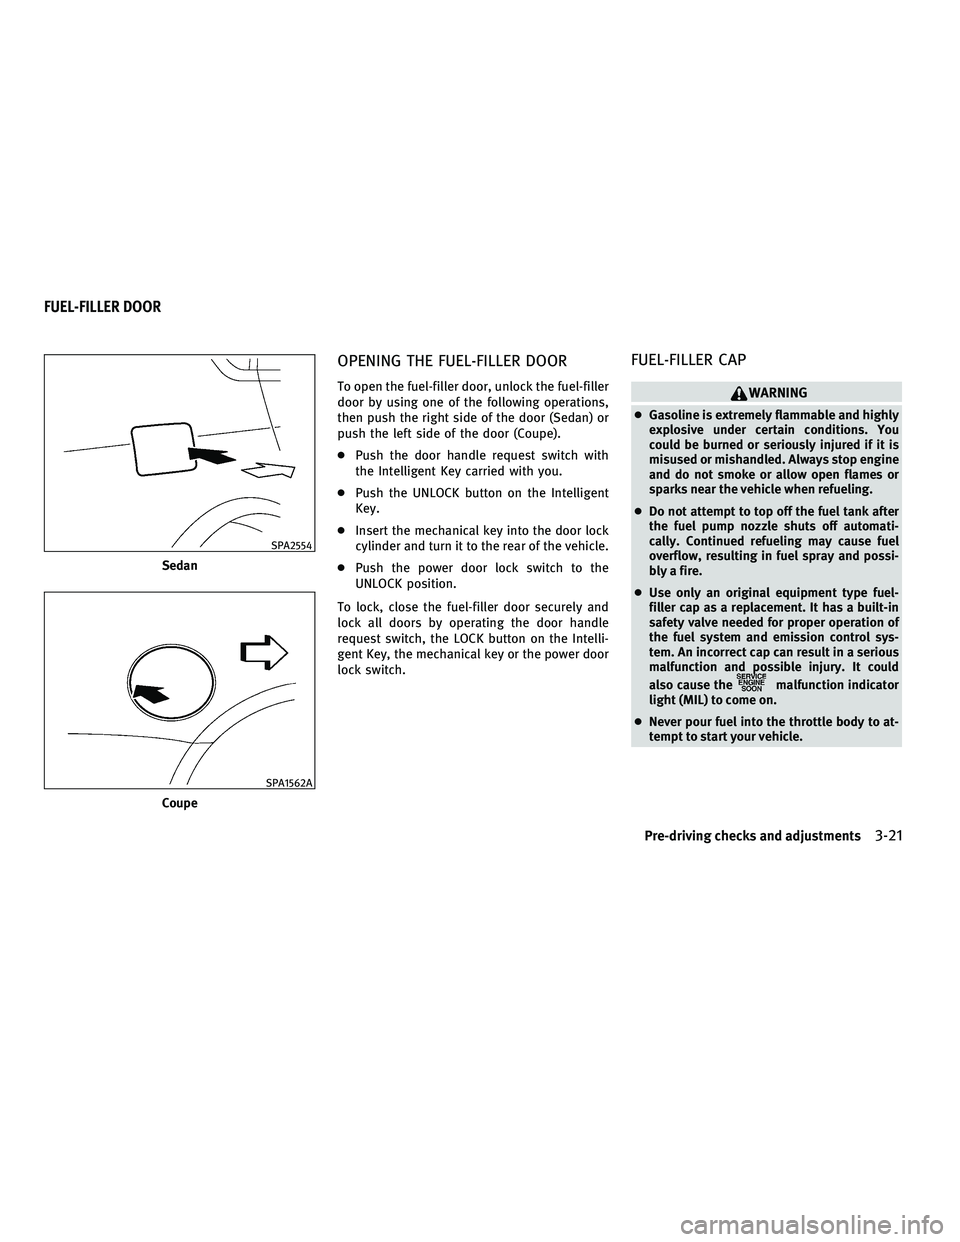 INFINITI G 2010 Owners Guide OPENING THE FUEL-FILLER DOOR
To open the fuel-filler door, unlock the fuel-filler
door by using one of the following operations,
then push the right side of the door (Sedan) or
push the left side of t